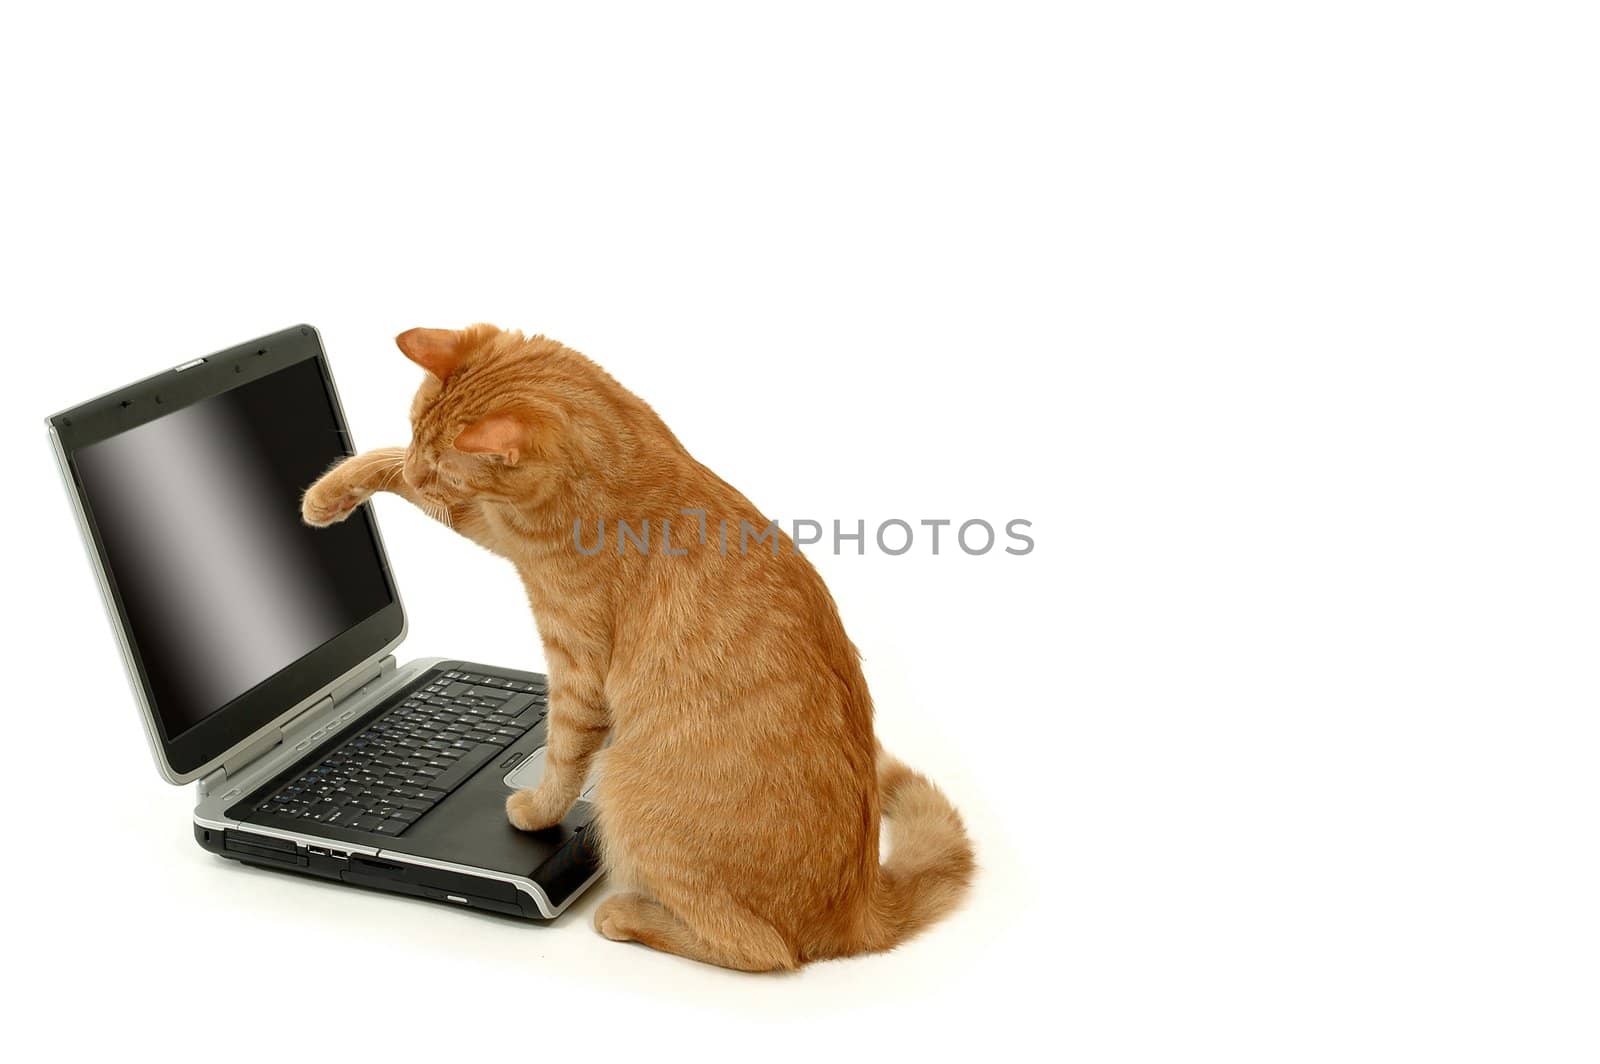 Cat and laptop. A cat is siting in front of a laptop